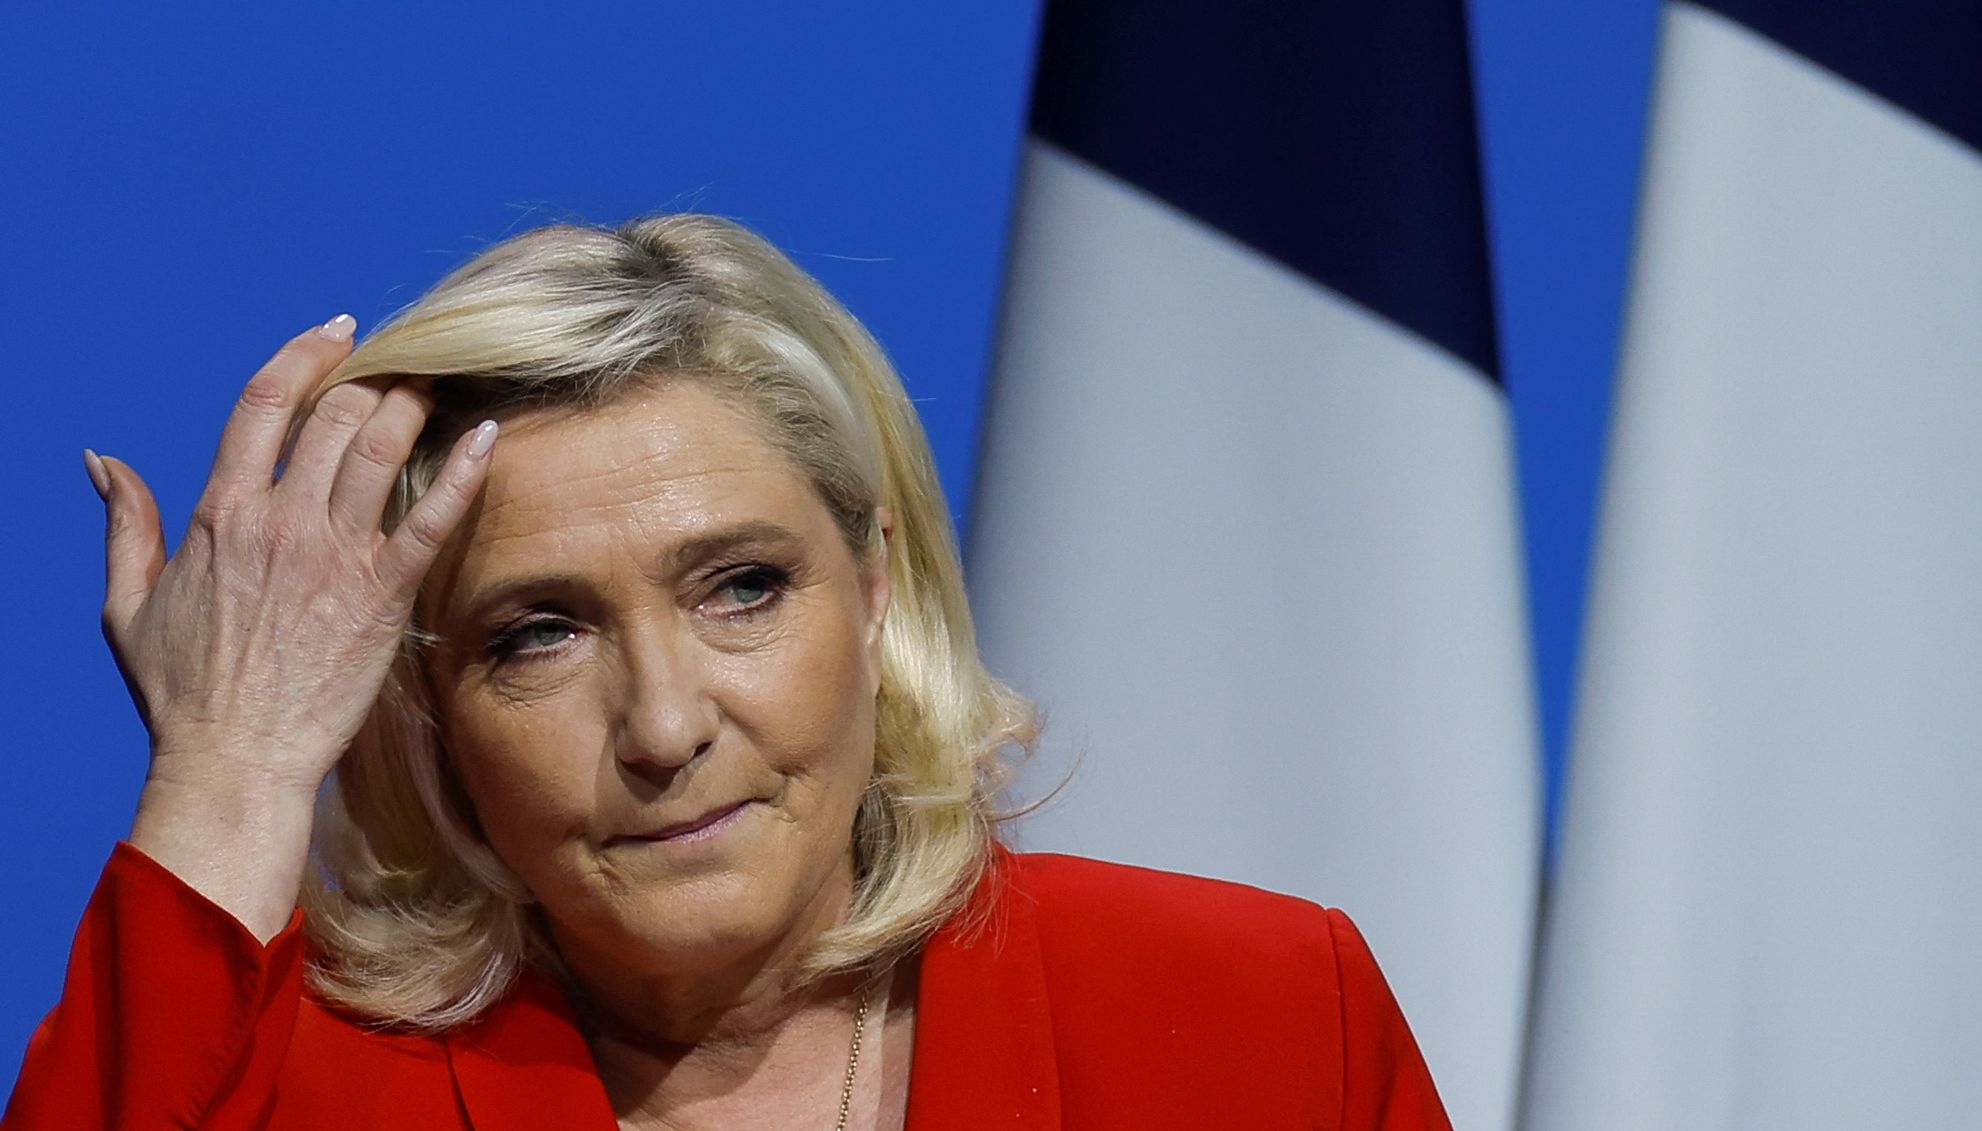 Marine Le Pen, French far-right National Rally (Rassemblement National) party candidate for the 2022 French presidential election, gestures during a campaign meeting in Avignon, France, April 14, 2022. REUTERS/Christian Hartmann